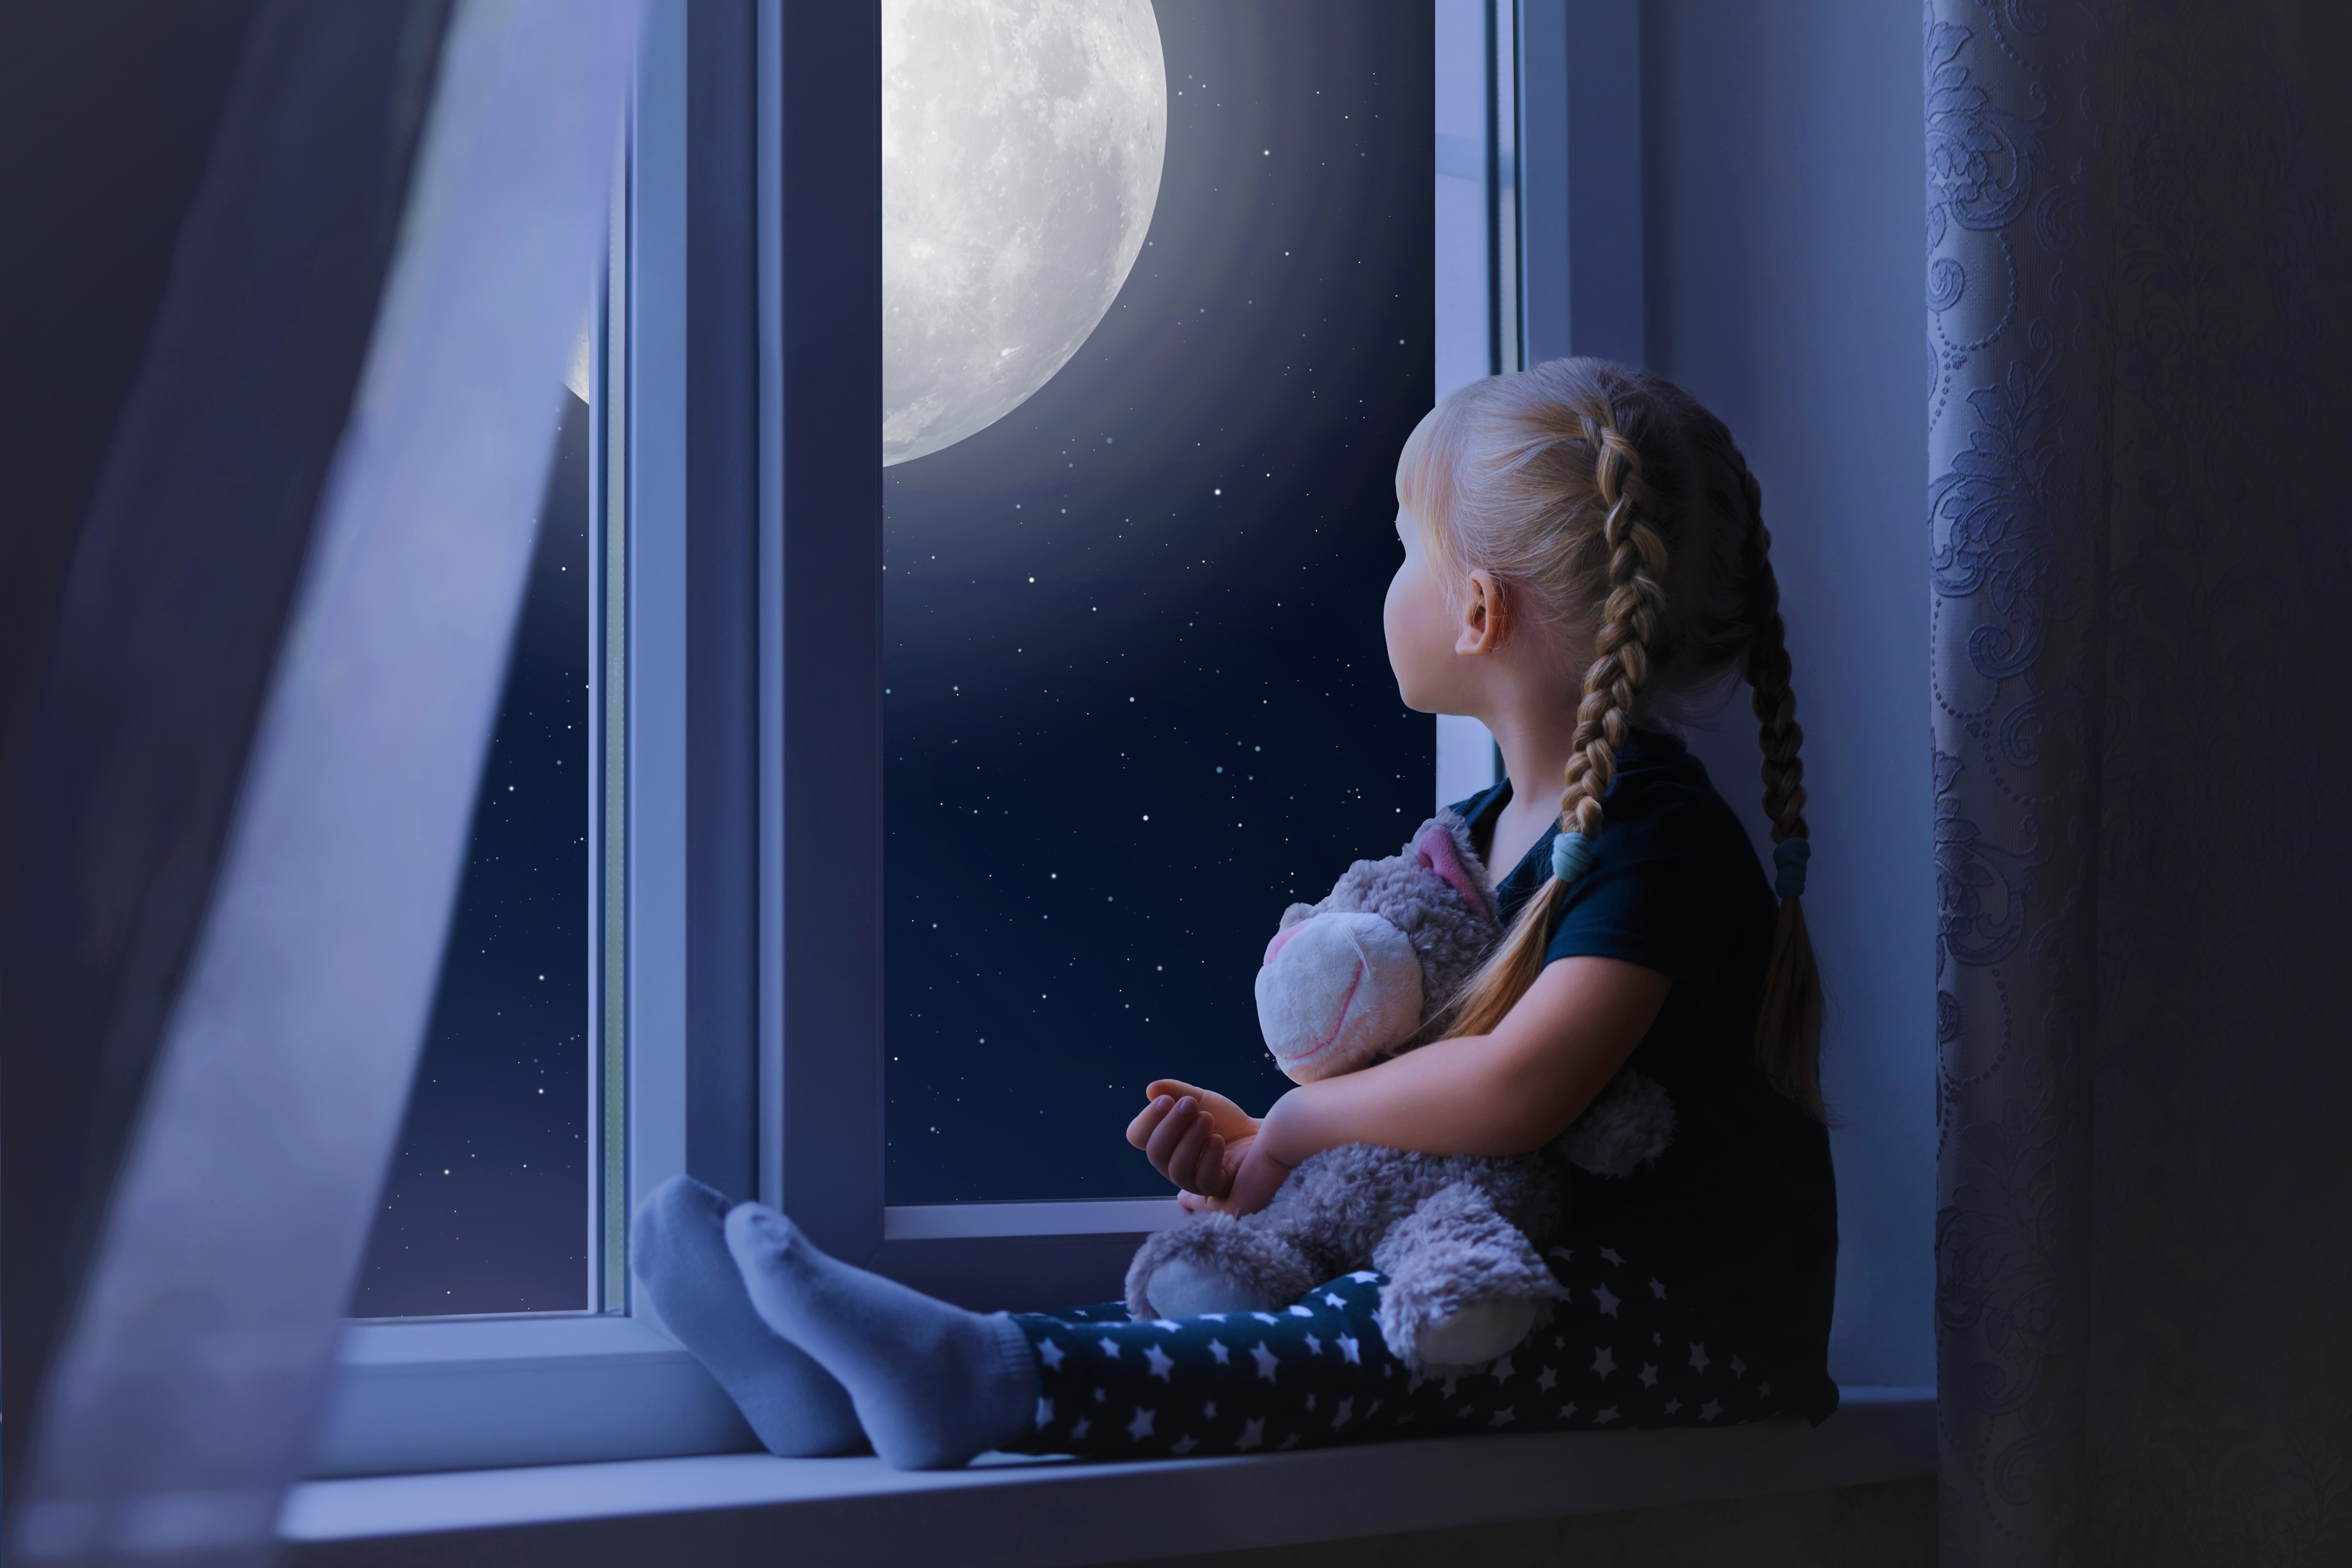 Little Girl Looking Out Window at Full Moon